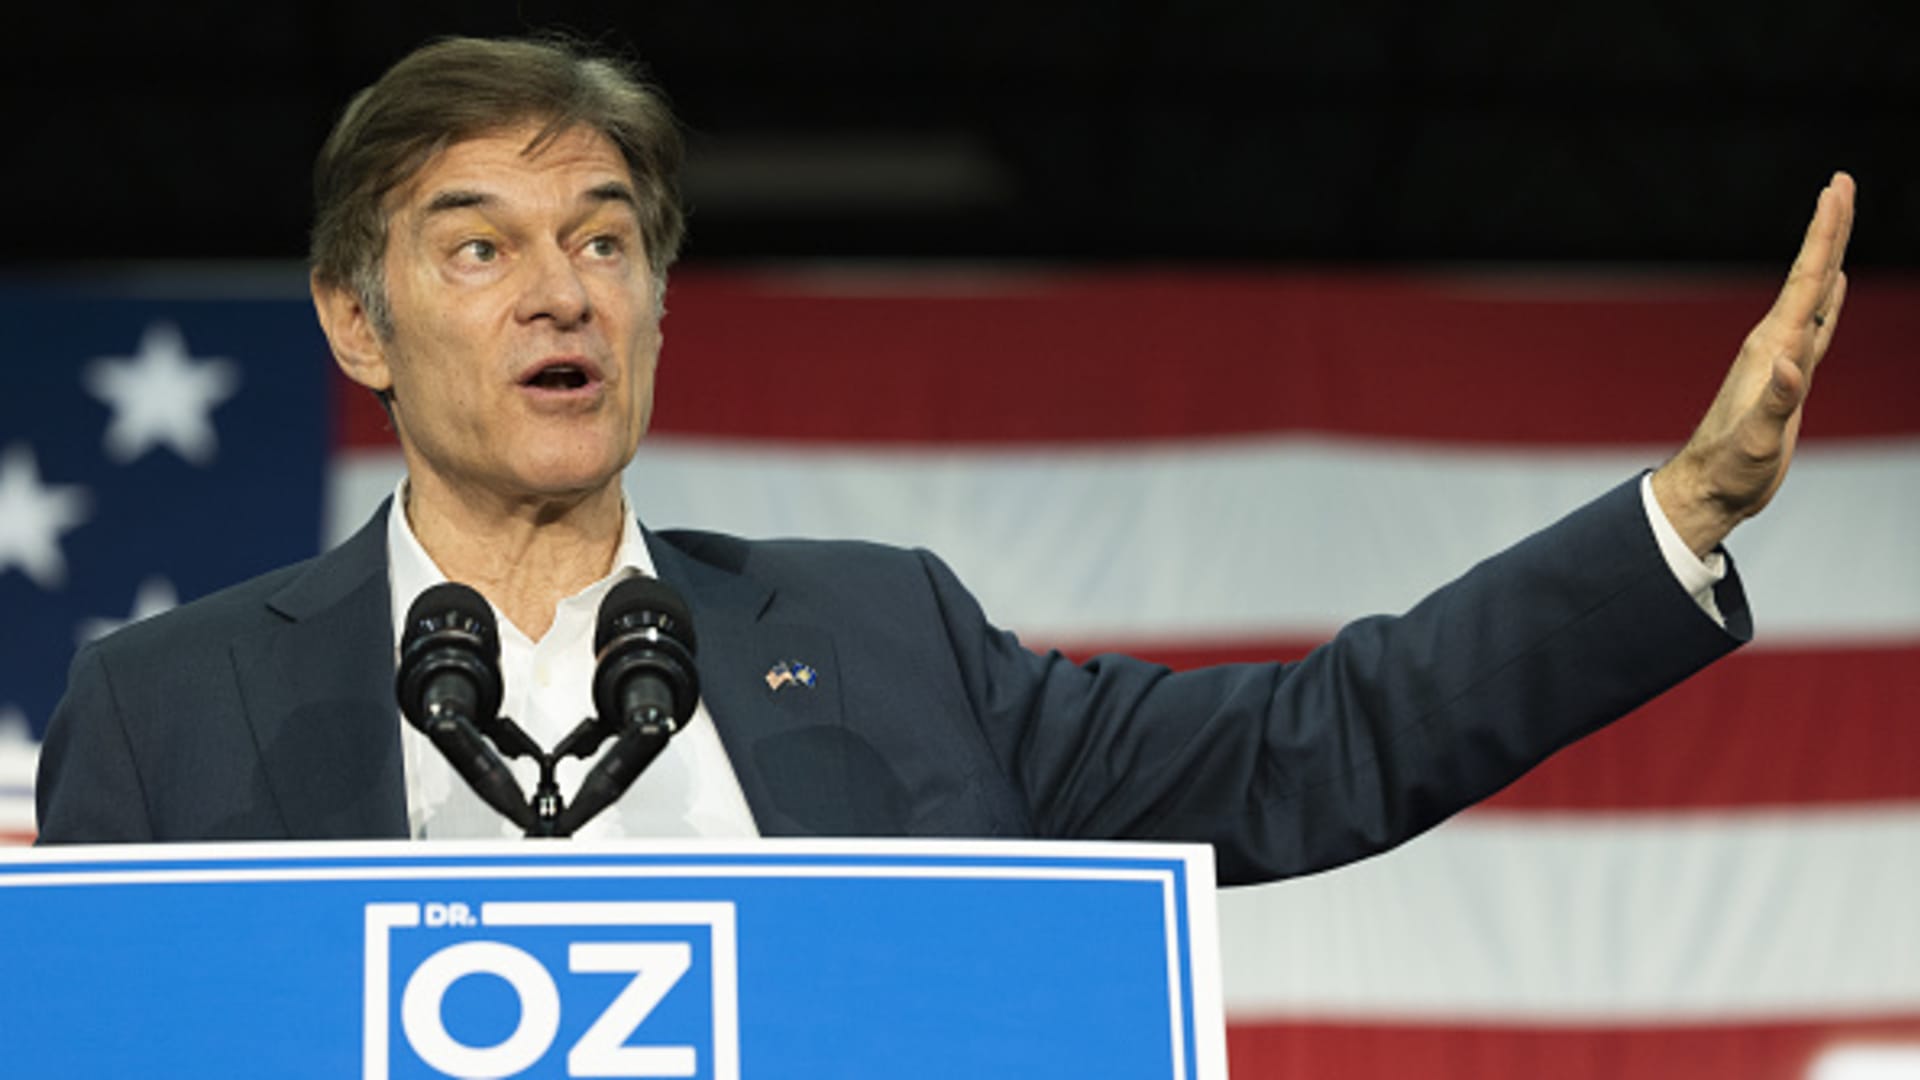 Mehmet Oz, US Republican Senate candidate for Pennsylvania, speaks during a 'Get Out The Vote' rally at Flexicon Corp. in Bethlehem, Pennsylvania, US, on Sunday, Nov. 6, 2022.